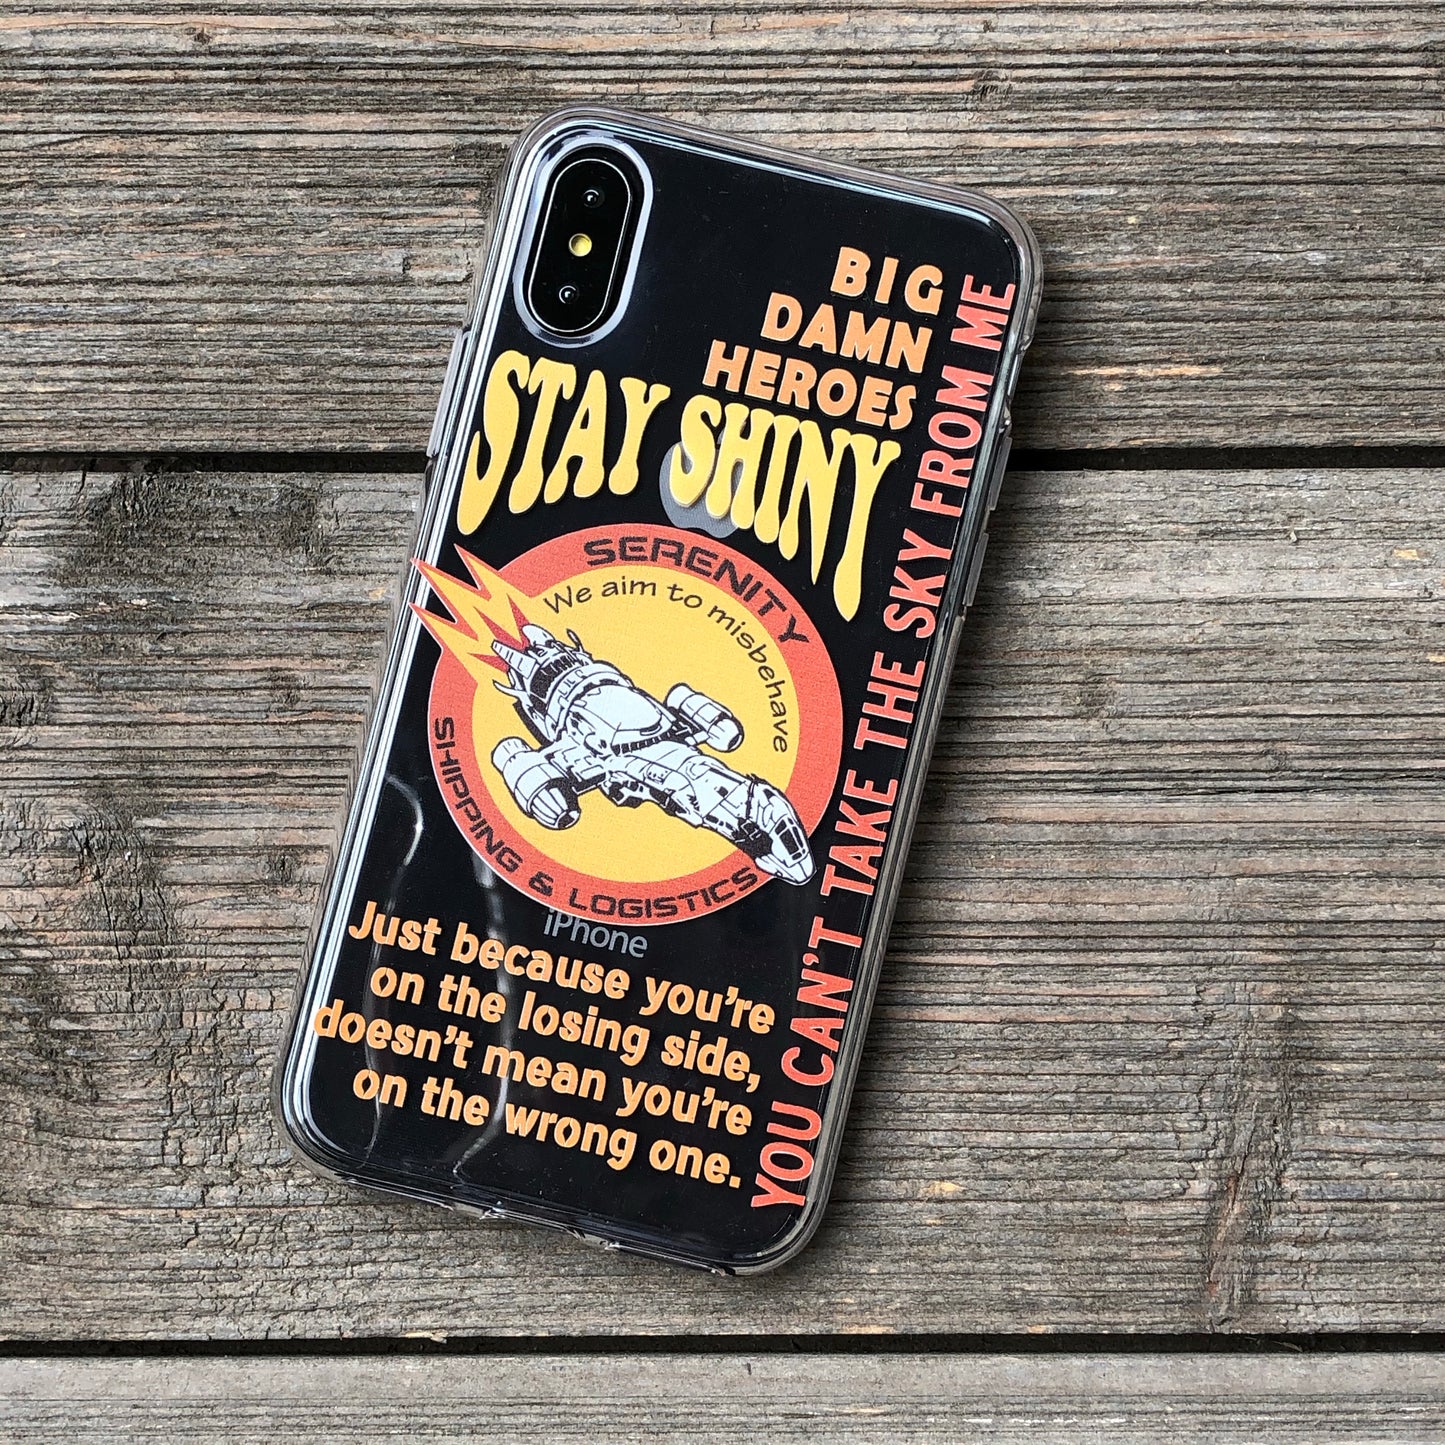 Stay shiny aim to misbehave firefly quotes iphone case